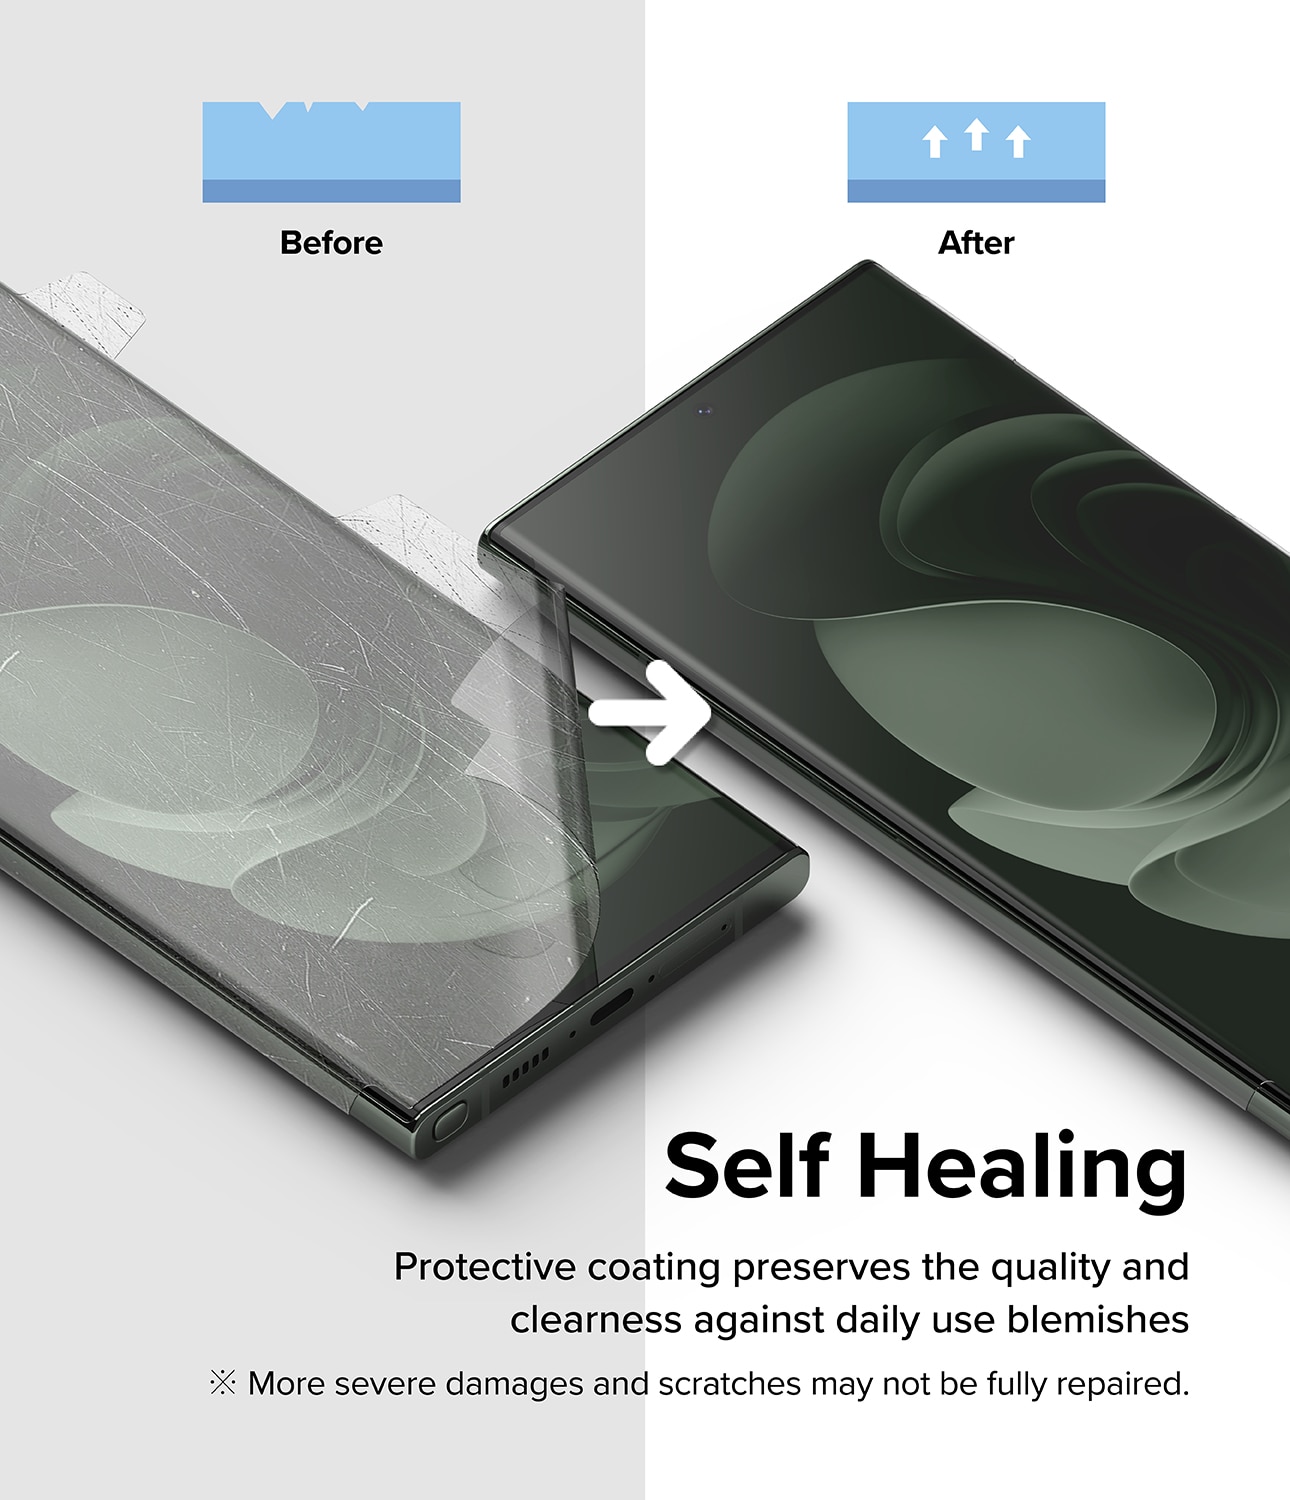 Samsung Galaxy S23 Ultra Dual Easy Wing Screen Protector (2-pack)